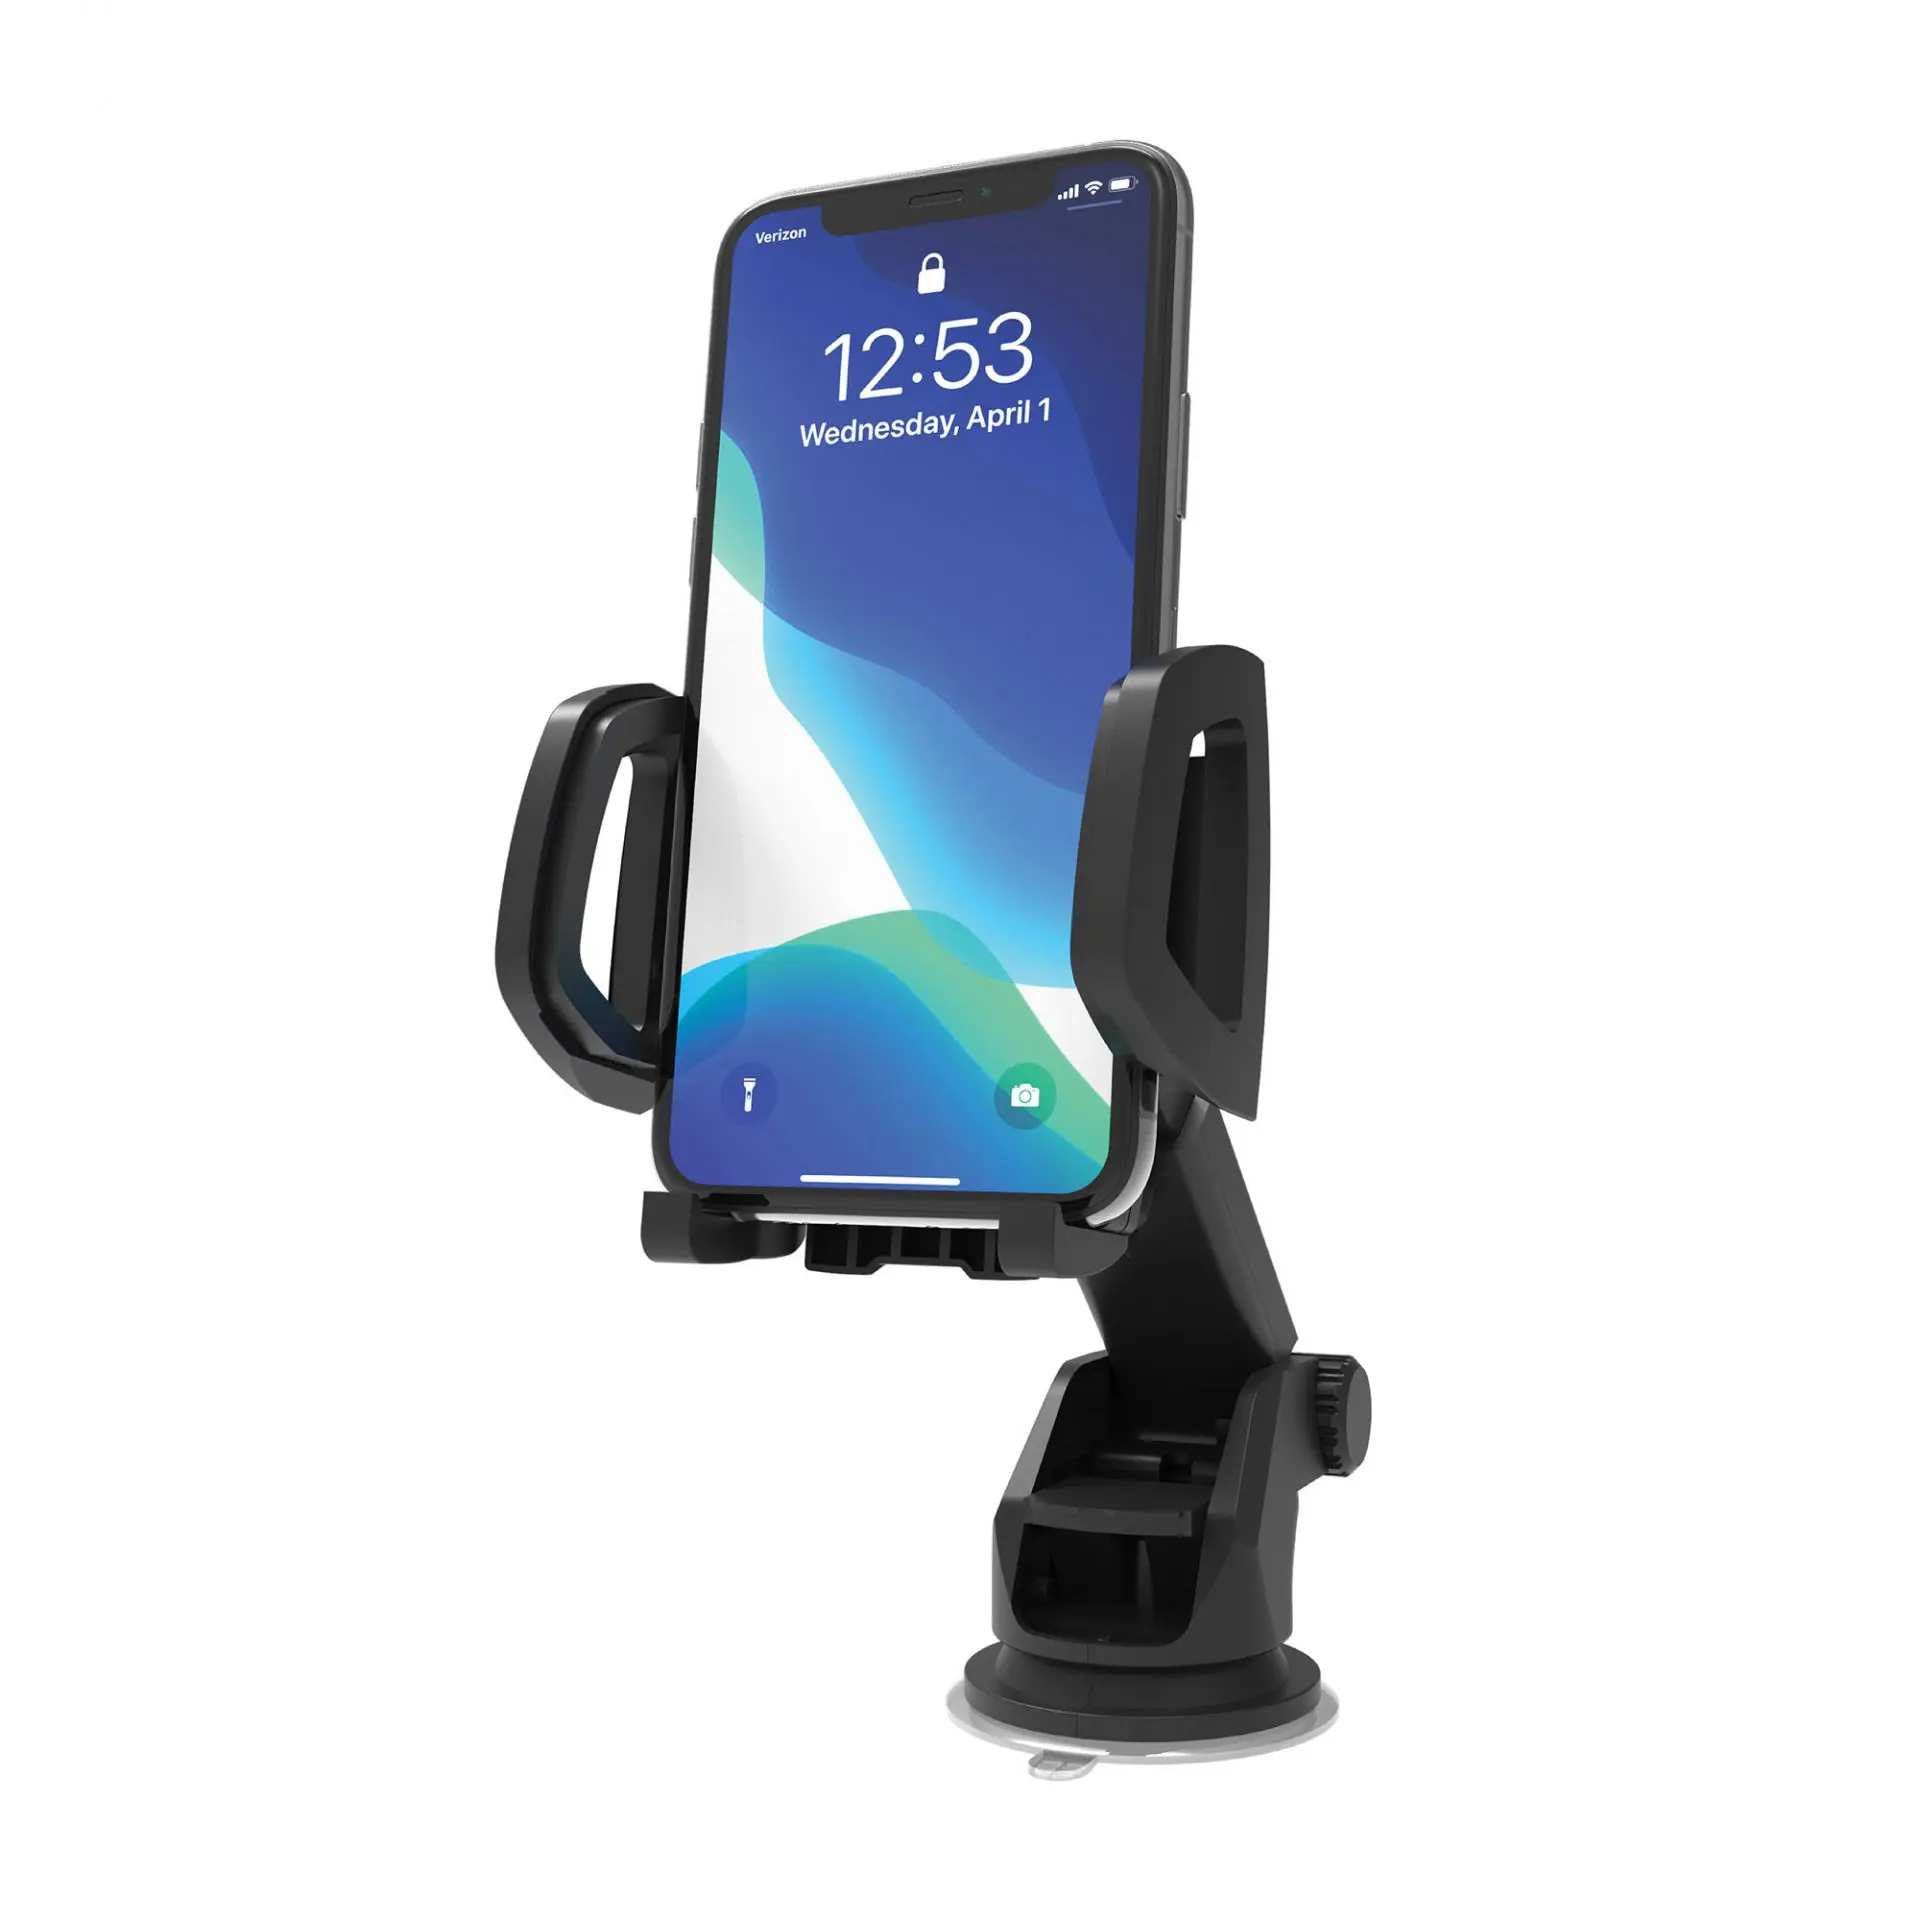 GRIP All-in-1 Automatic Arm Wireless Charging Car Mount